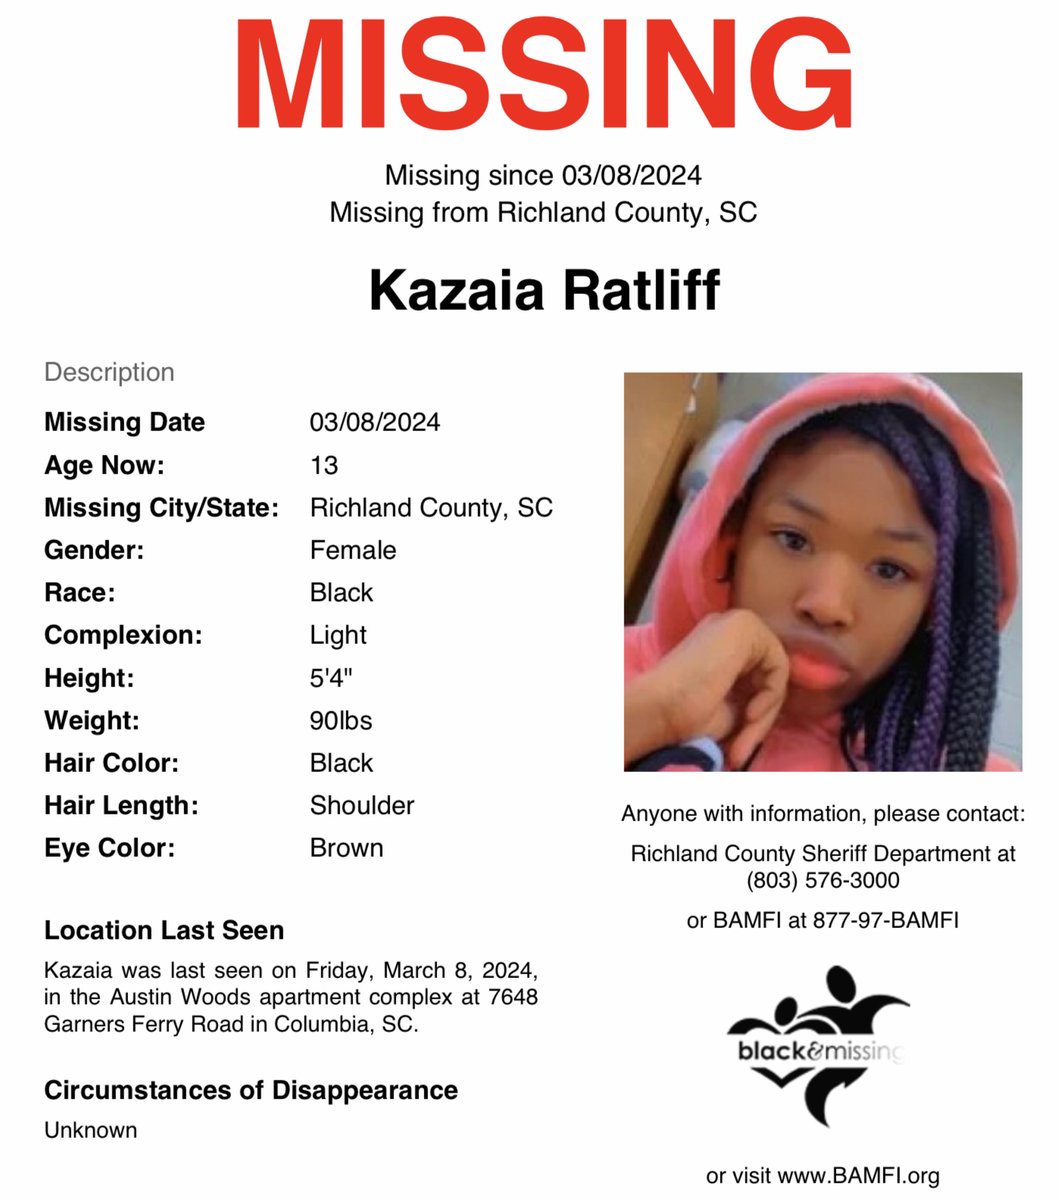 #Columbia, #SouthCarolina: 13y/o Kazaia Ratliff was last seen on March 8, in the Austin Woods apartment complex at 7648 Garners Ferry Road in Columbia, SC. Have you seen Kazaia? #KazaiaRatliff #RichlandCounty